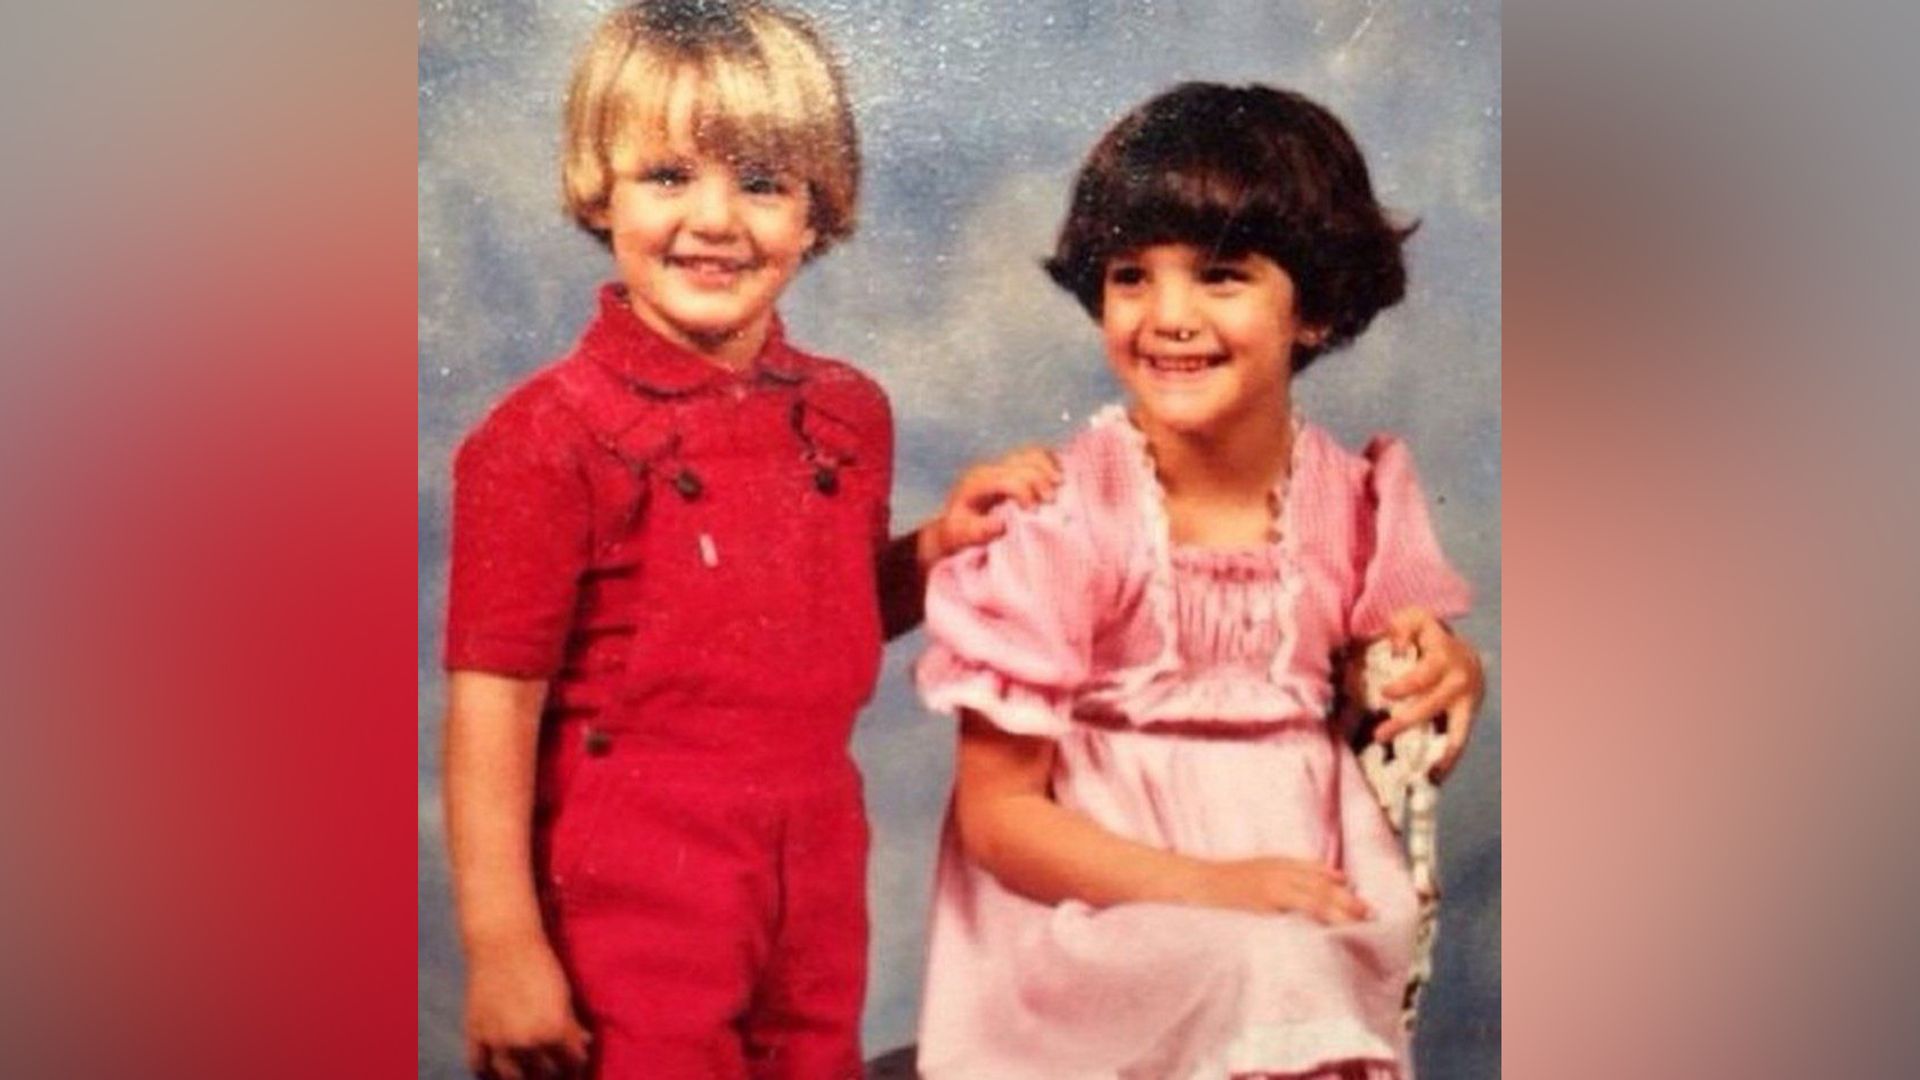 Pedro Pascal as a child with his sister